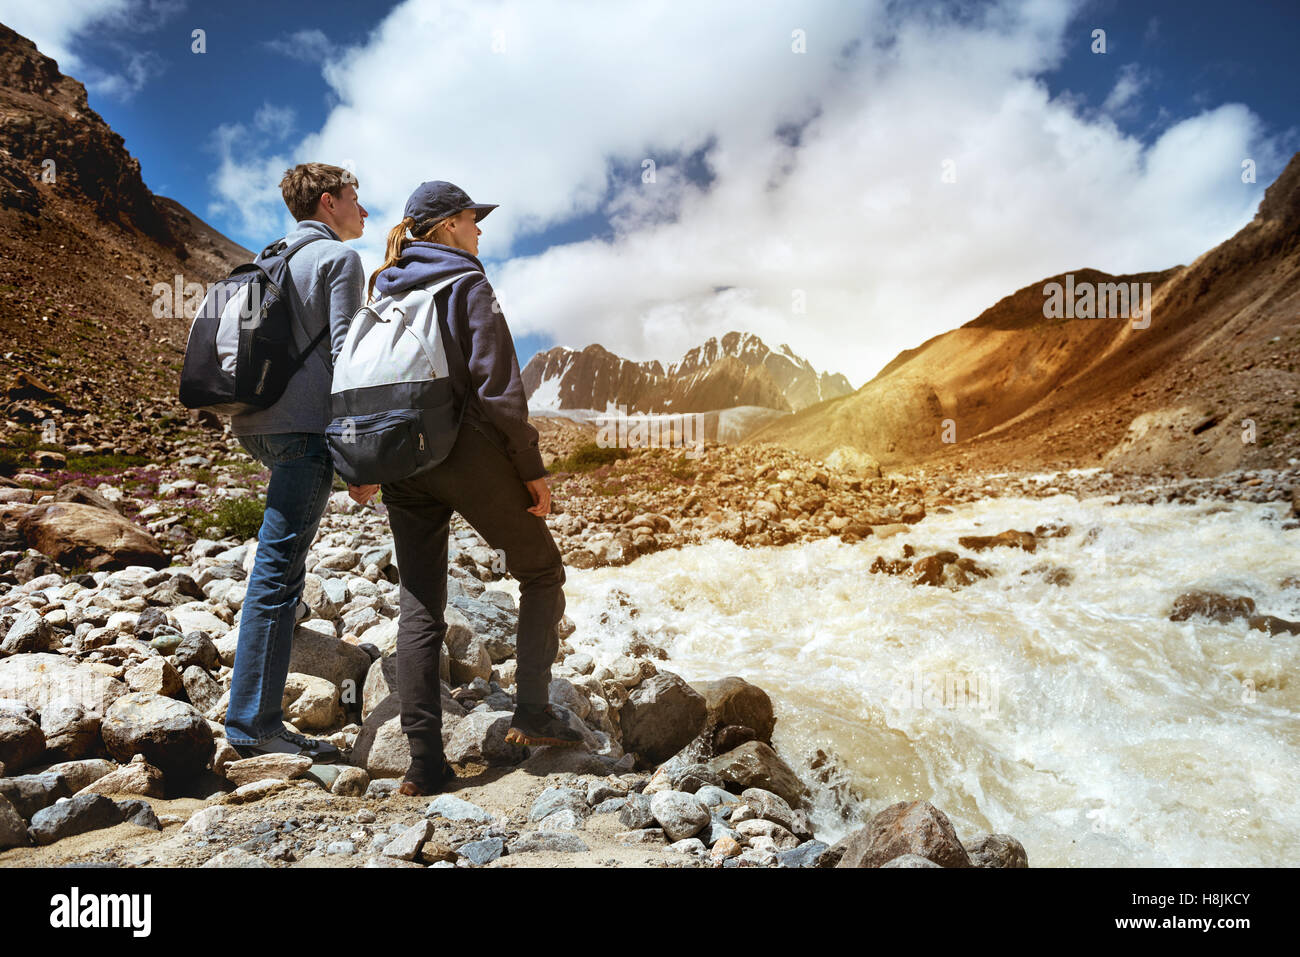 Couple hikers mountains river hiking Stock Photo